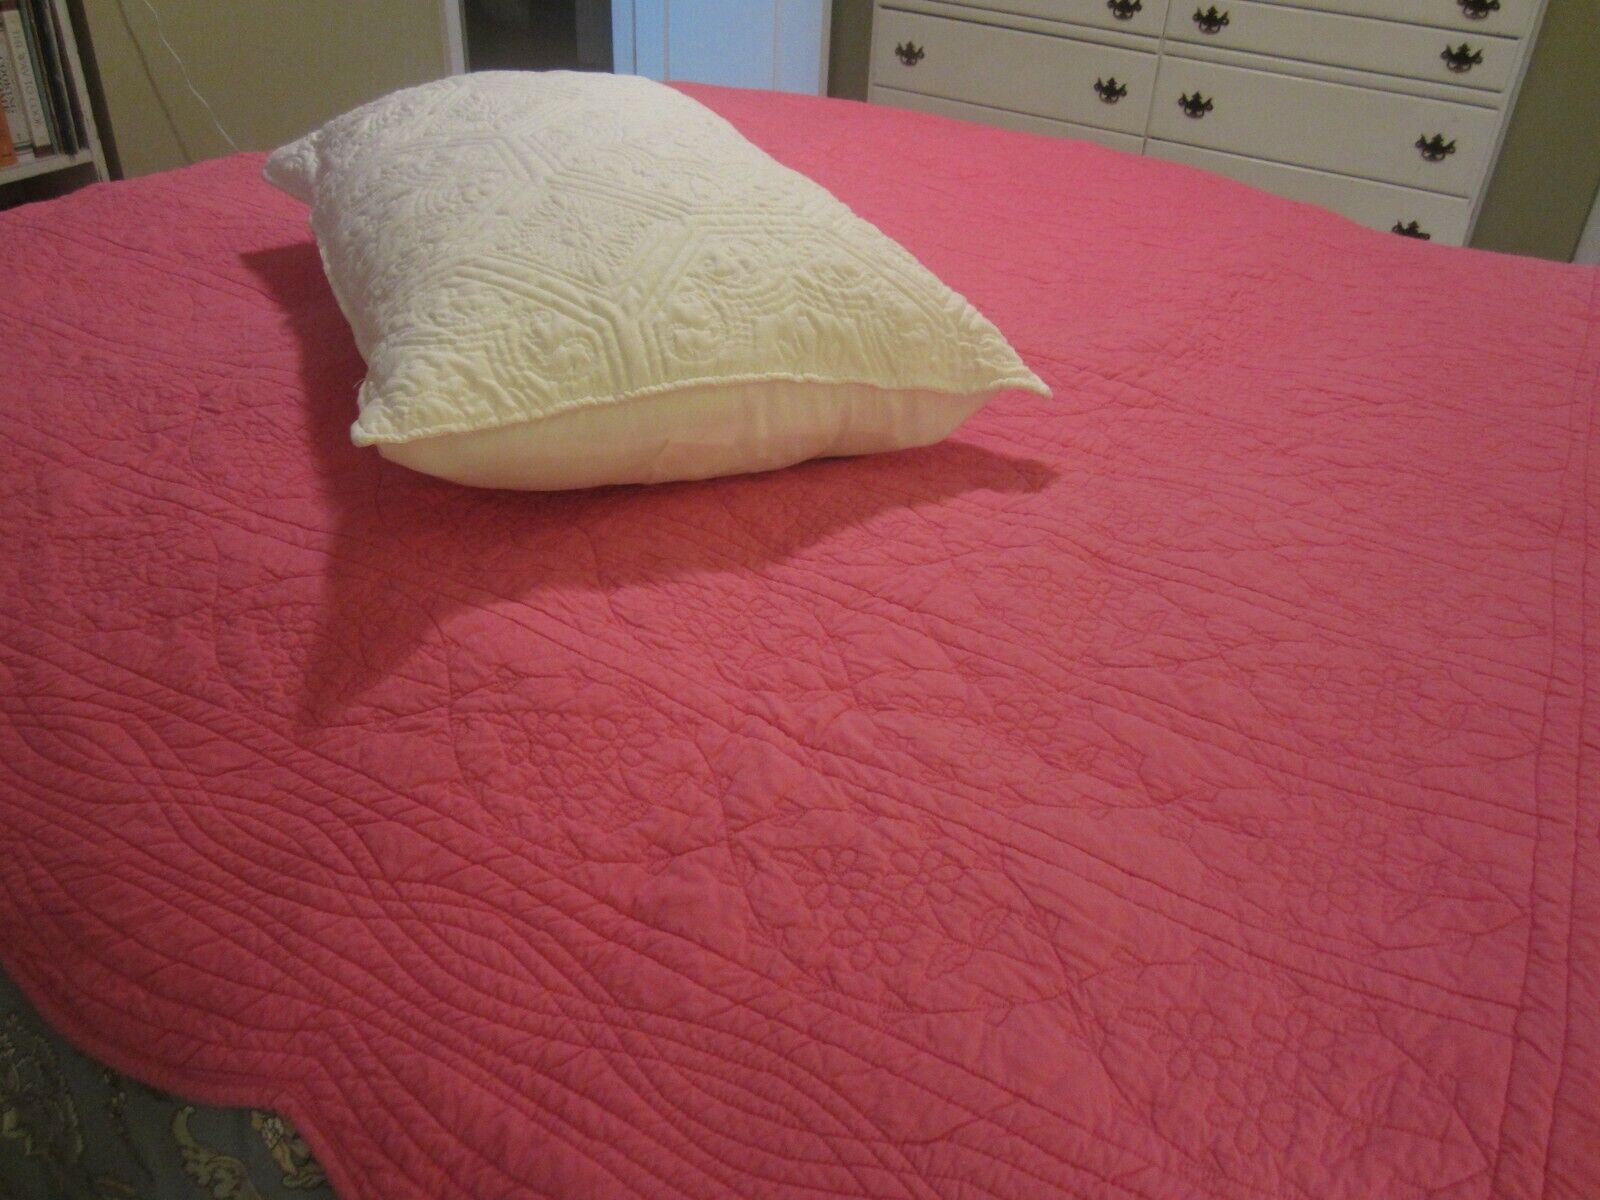 Pottery Barn Kids Solid Bright Pink Reverses To Lighter Pink Daisy Quilt Twin